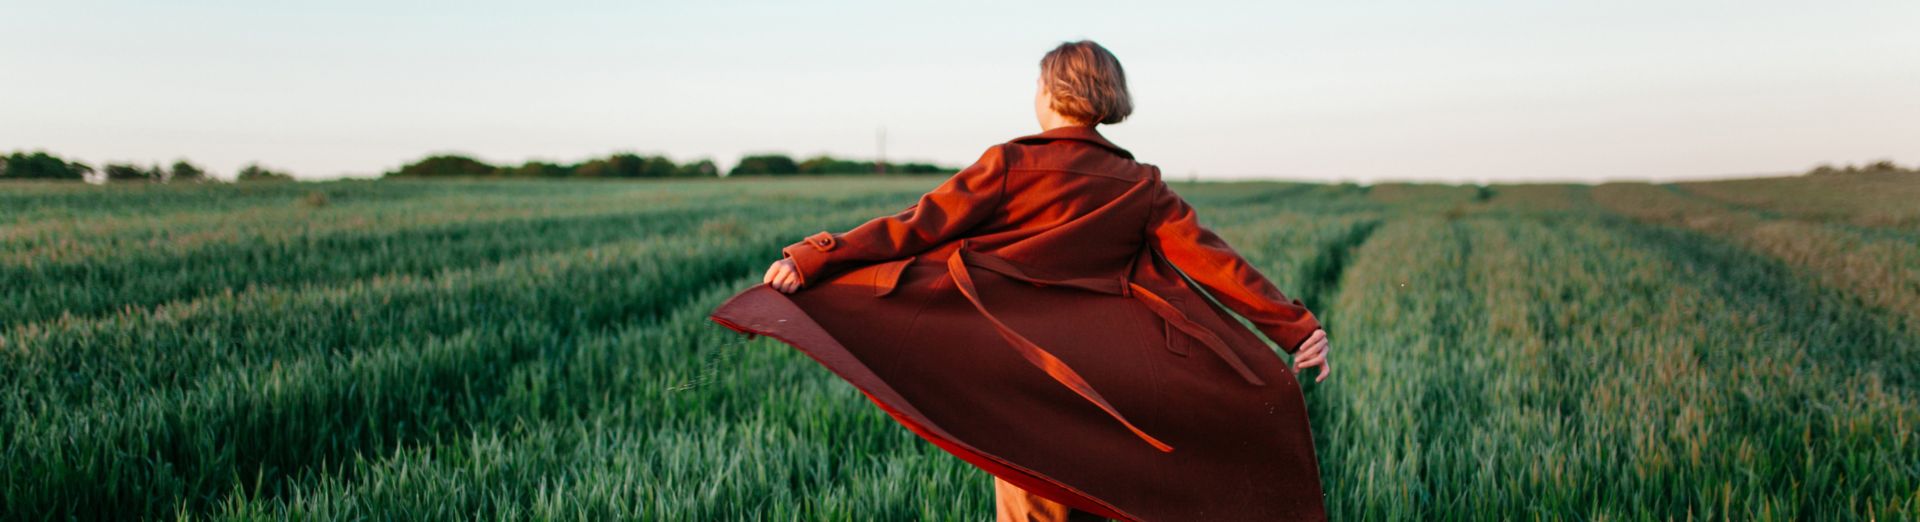 Woman runs through field in a vibrant red coat.